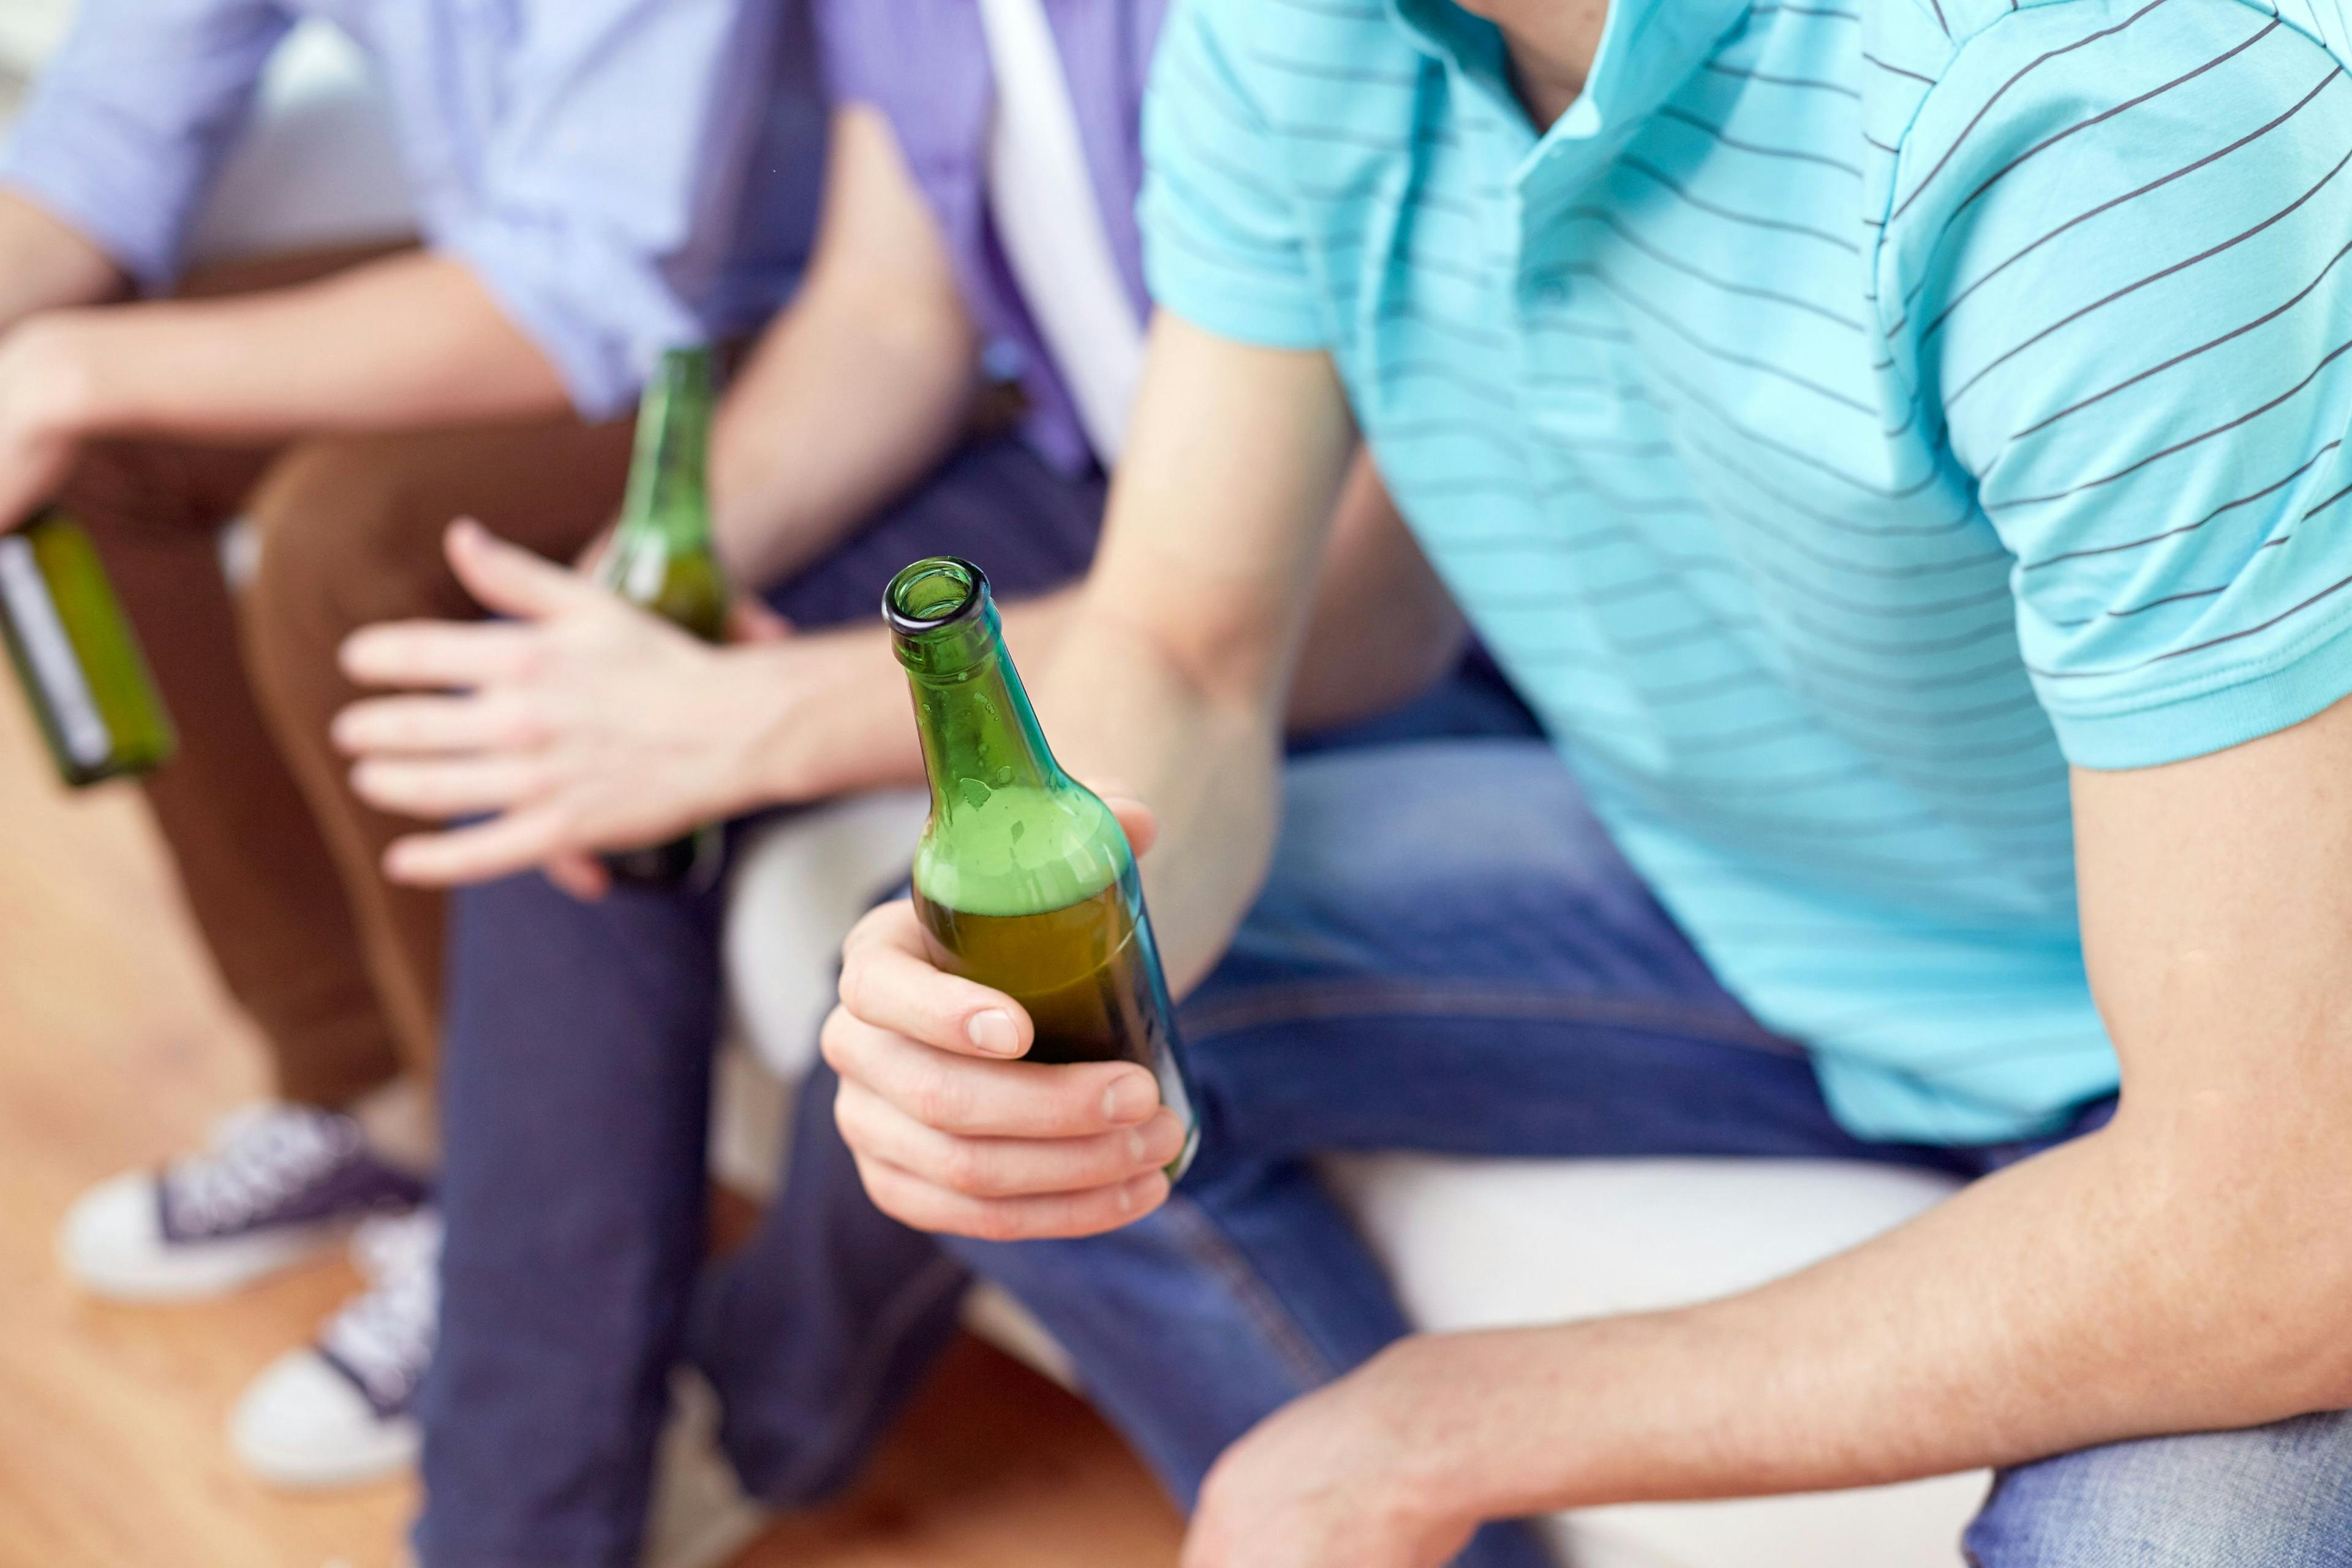 Experimentation among most common reasons for substance use in adolescence | Image Credit: © Syda Productions - © Syda Productions - stock.adobe.com.